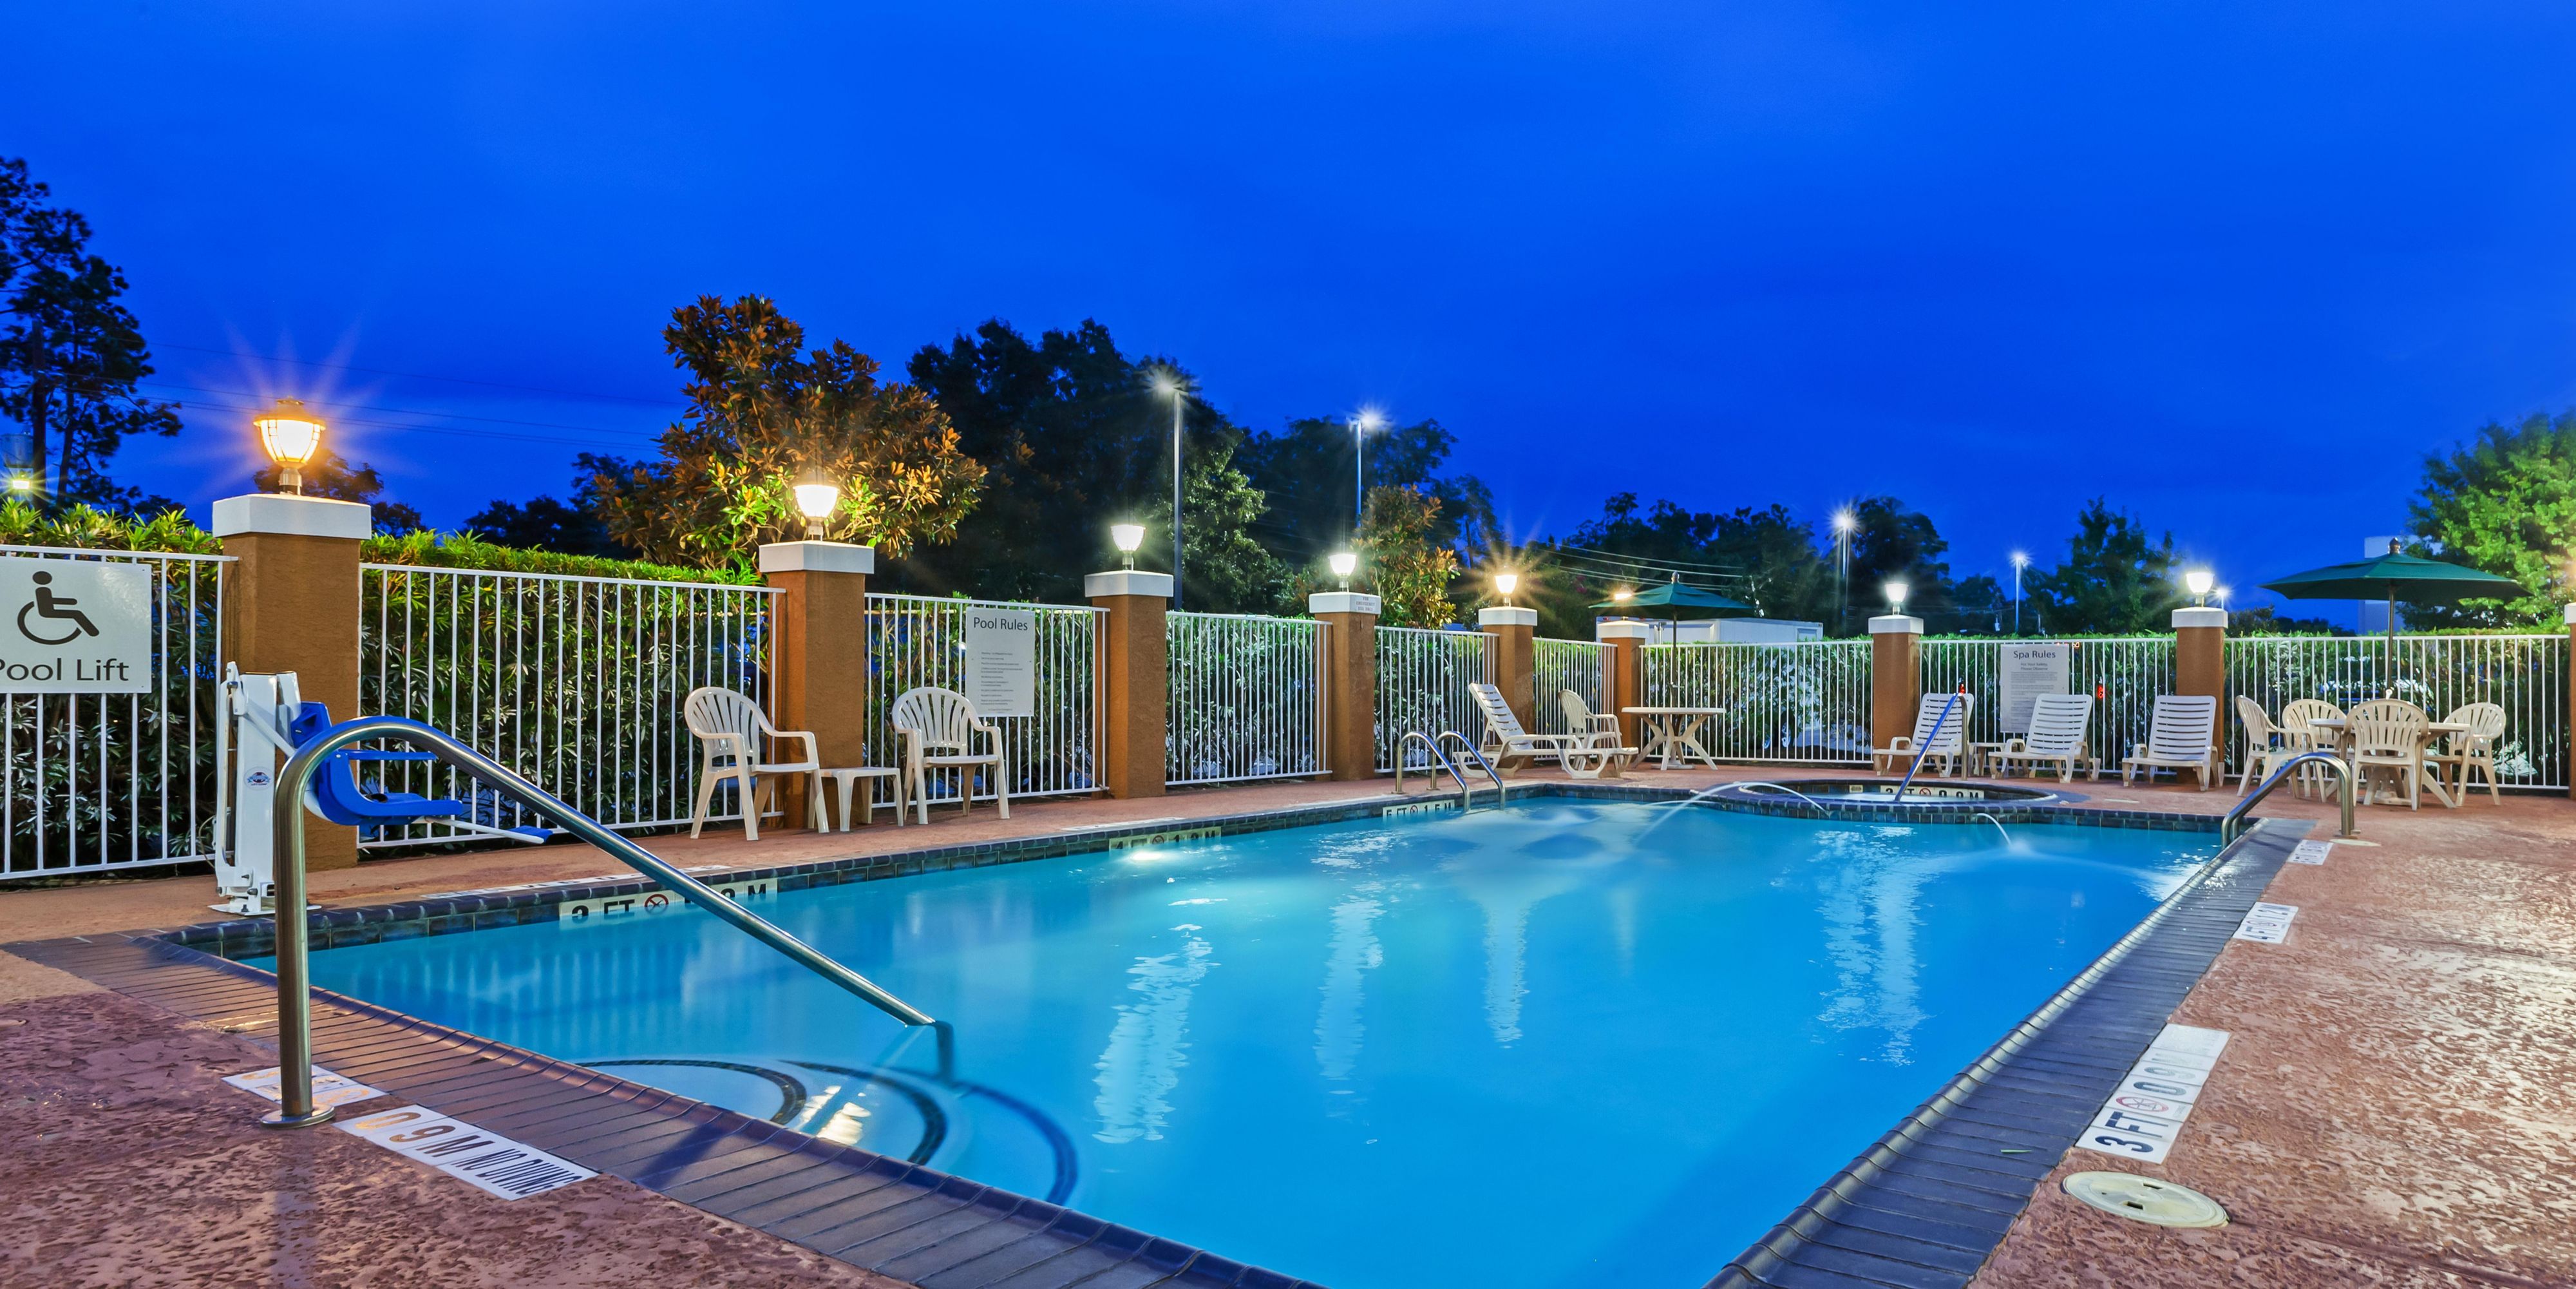 No stay at the Holiday Inn Express Beaumont would be complete without going for a dip in our outdoor heated pool!  Keep the kids entertained when you're not out exploring, or just enjoy a relaxing soak in our whirlpool spa.